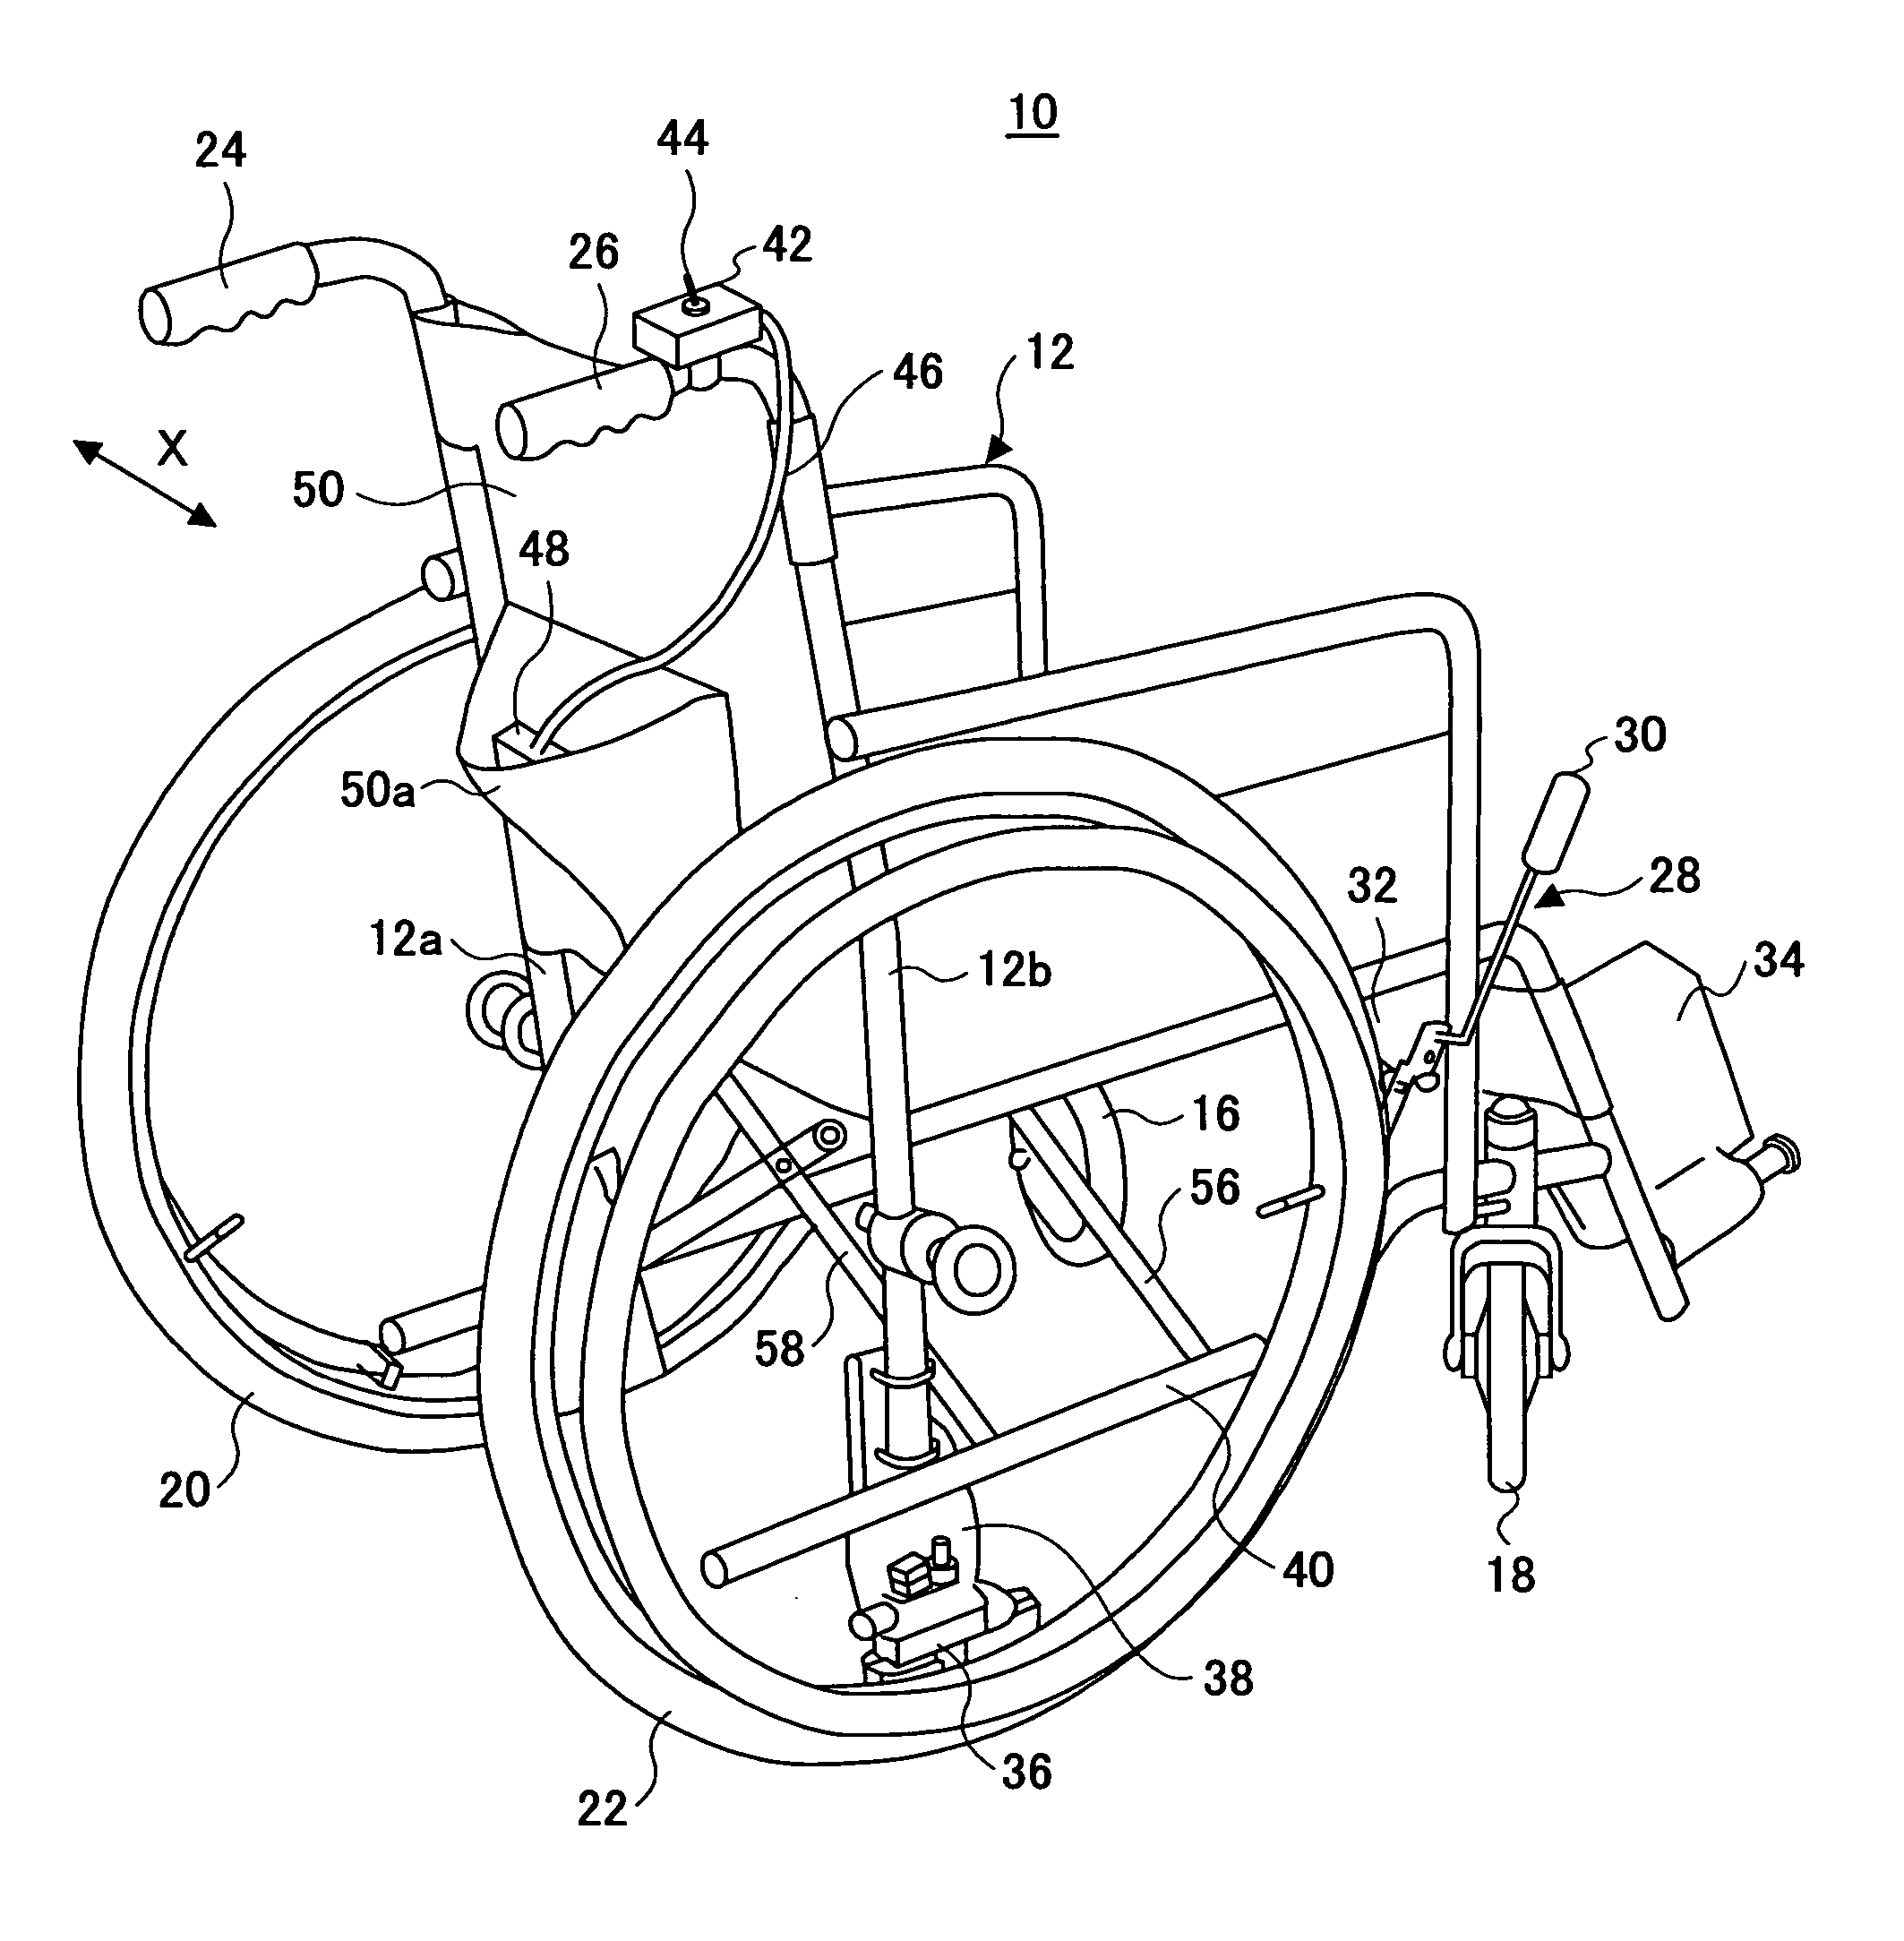 Wheelchair, brake unit therefor, and brake unit for a manually-propelled vehicle